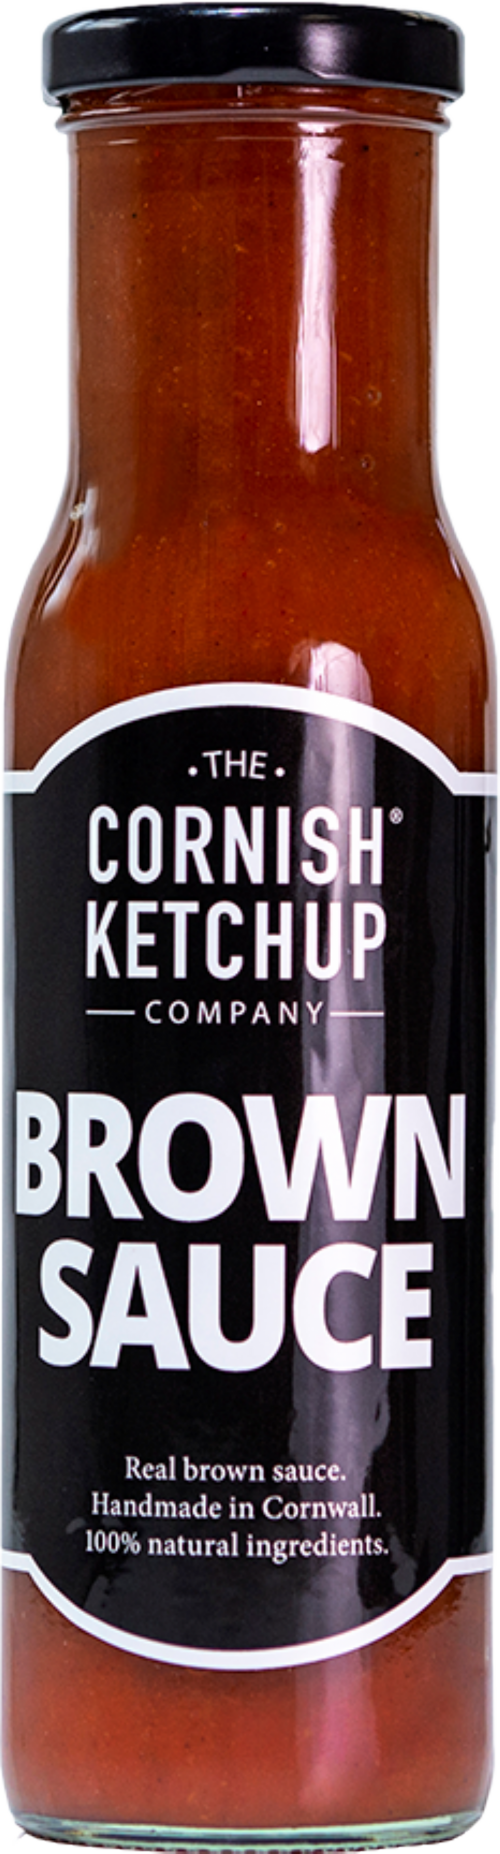 THE CORNISH KETCHUP CO. Brown Sauce 255g